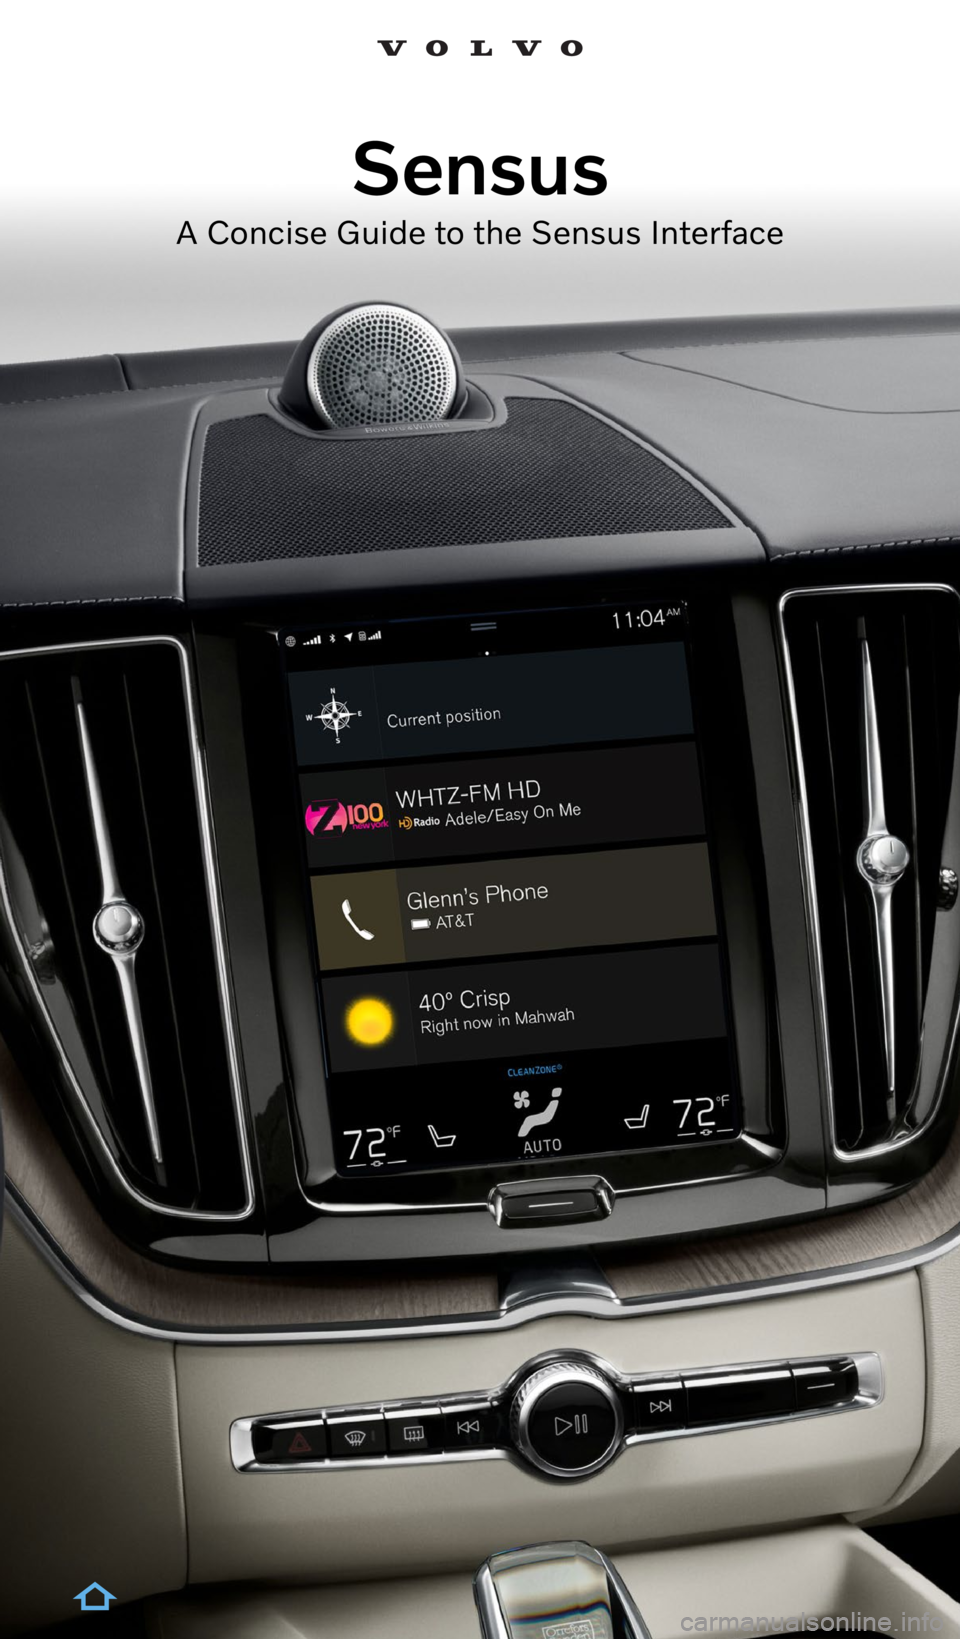 VOLVO V60 RECHARGE 2022  Sensus Digital Guide Sensus
A Concise Guide to the Sensus Interface  